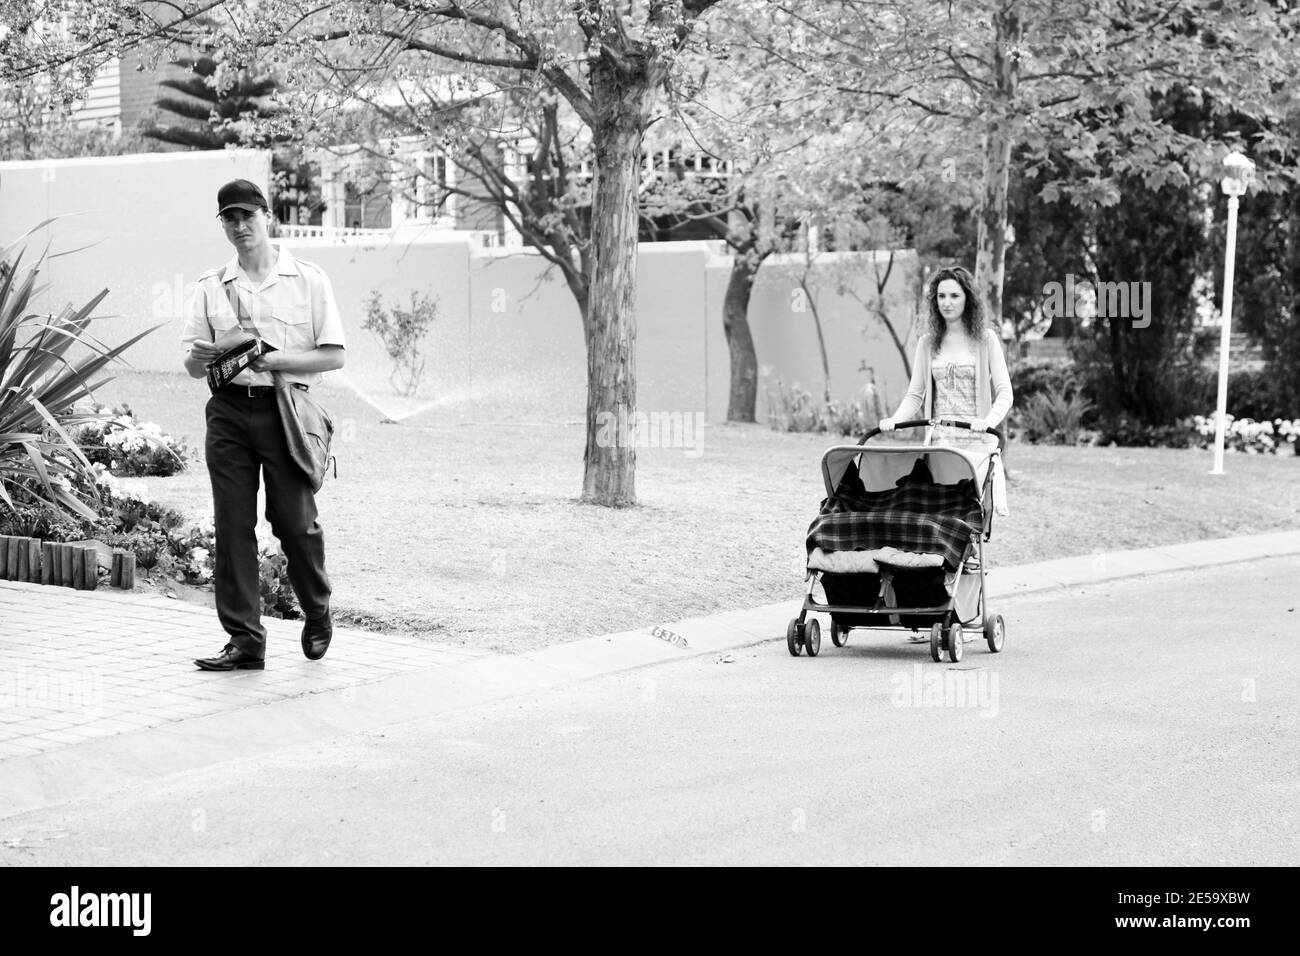 JOHANNESBURG, SOUTH AFRICA - Jan 05, 2021: Johannesburg, South Africa - September 11, 2010: Mom with pram and Mailman delivering mail in a wealthy sub Stock Photo